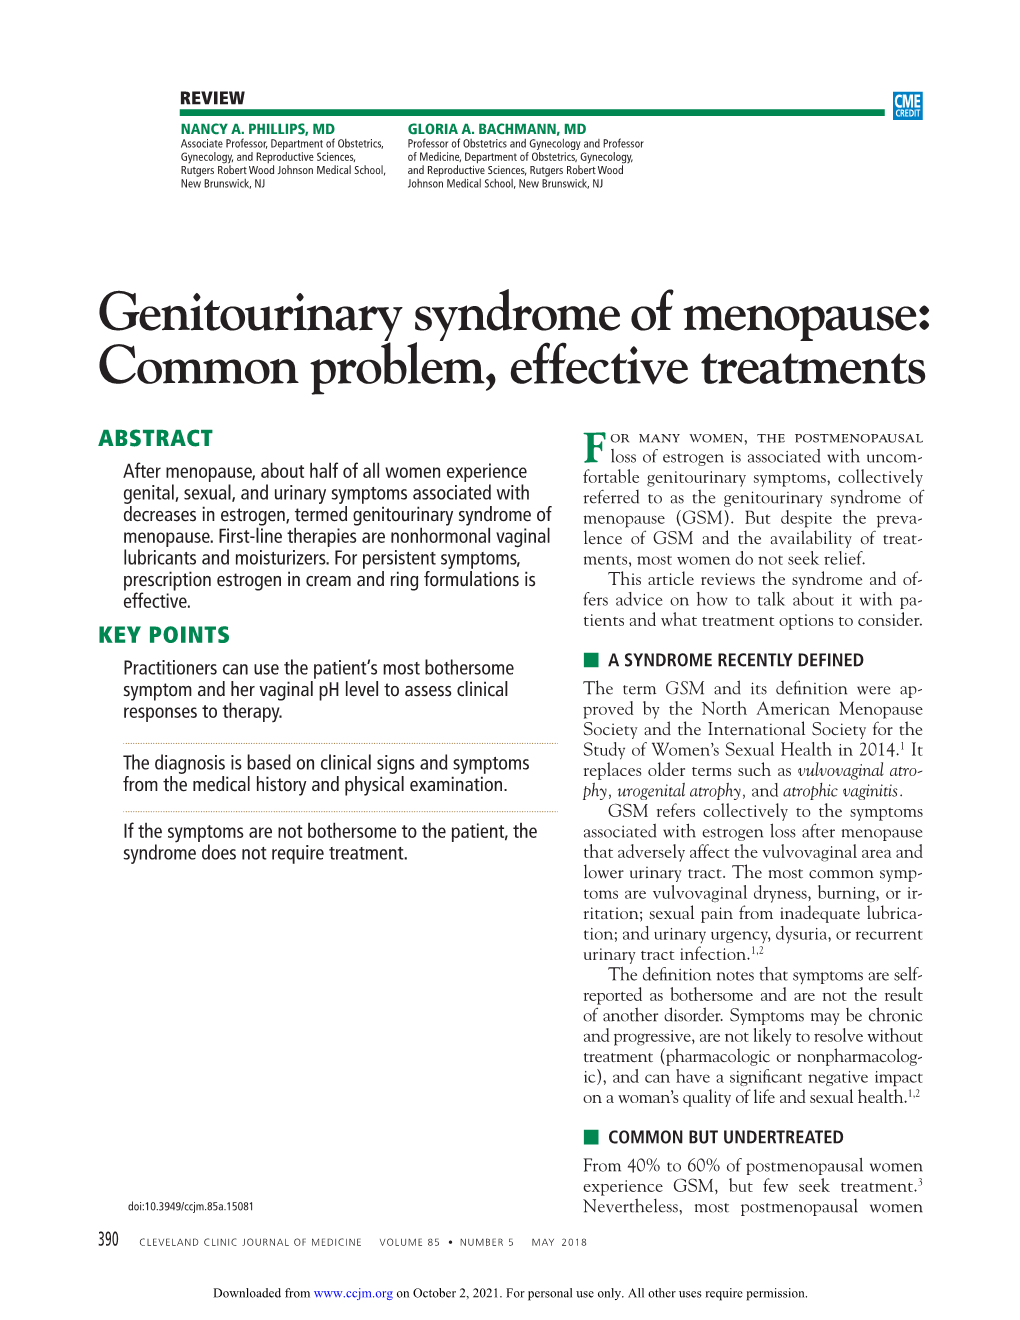 Genitourinary Syndrome of Menopause: Common Problem, Effective Treatments